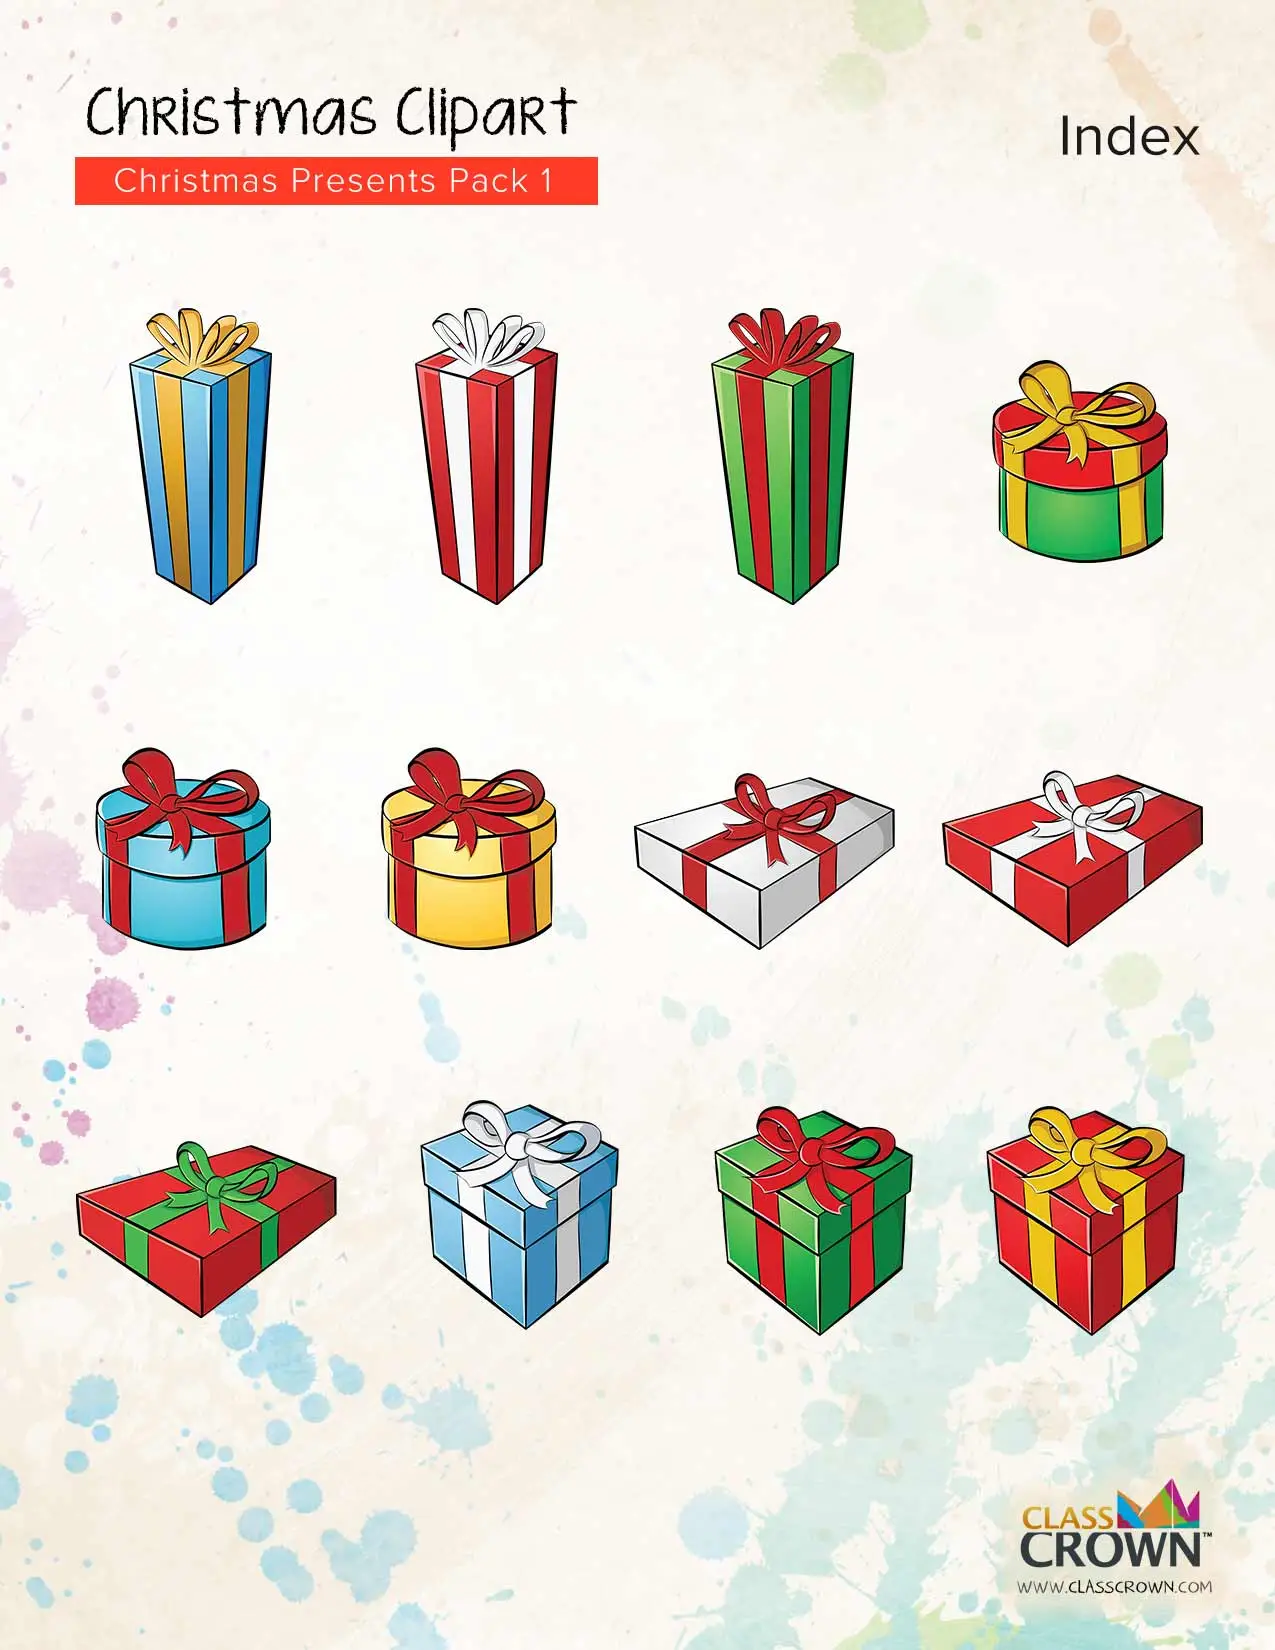 Index of Christmas presents clipart.